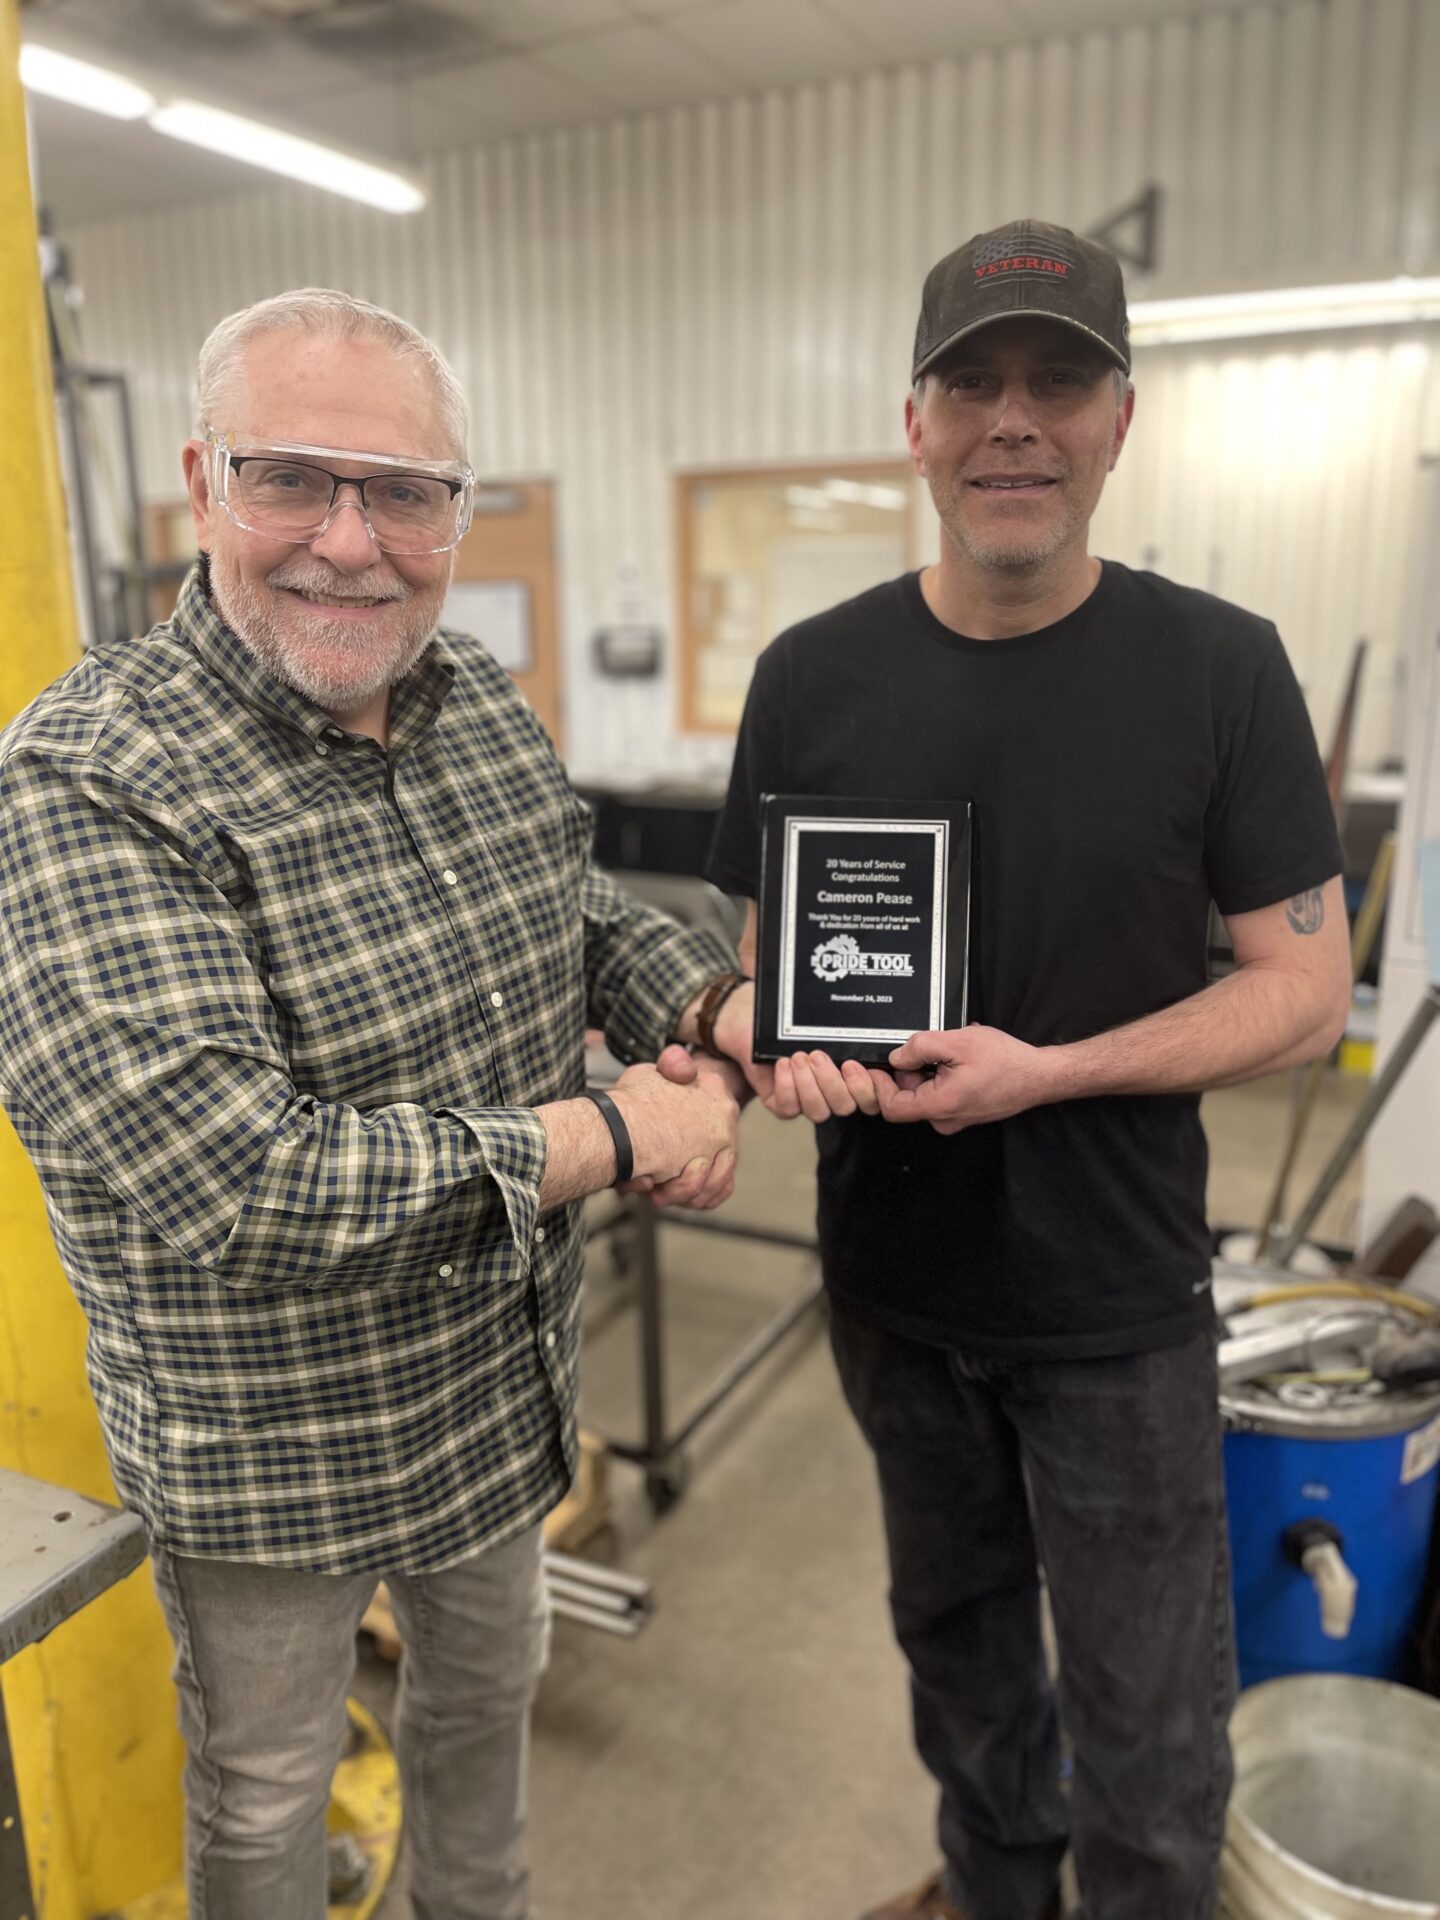 Employee longevity and dediction as exemplified by Cameron Pease, a 20 year experience CNC lathe operator at Pride Tool.